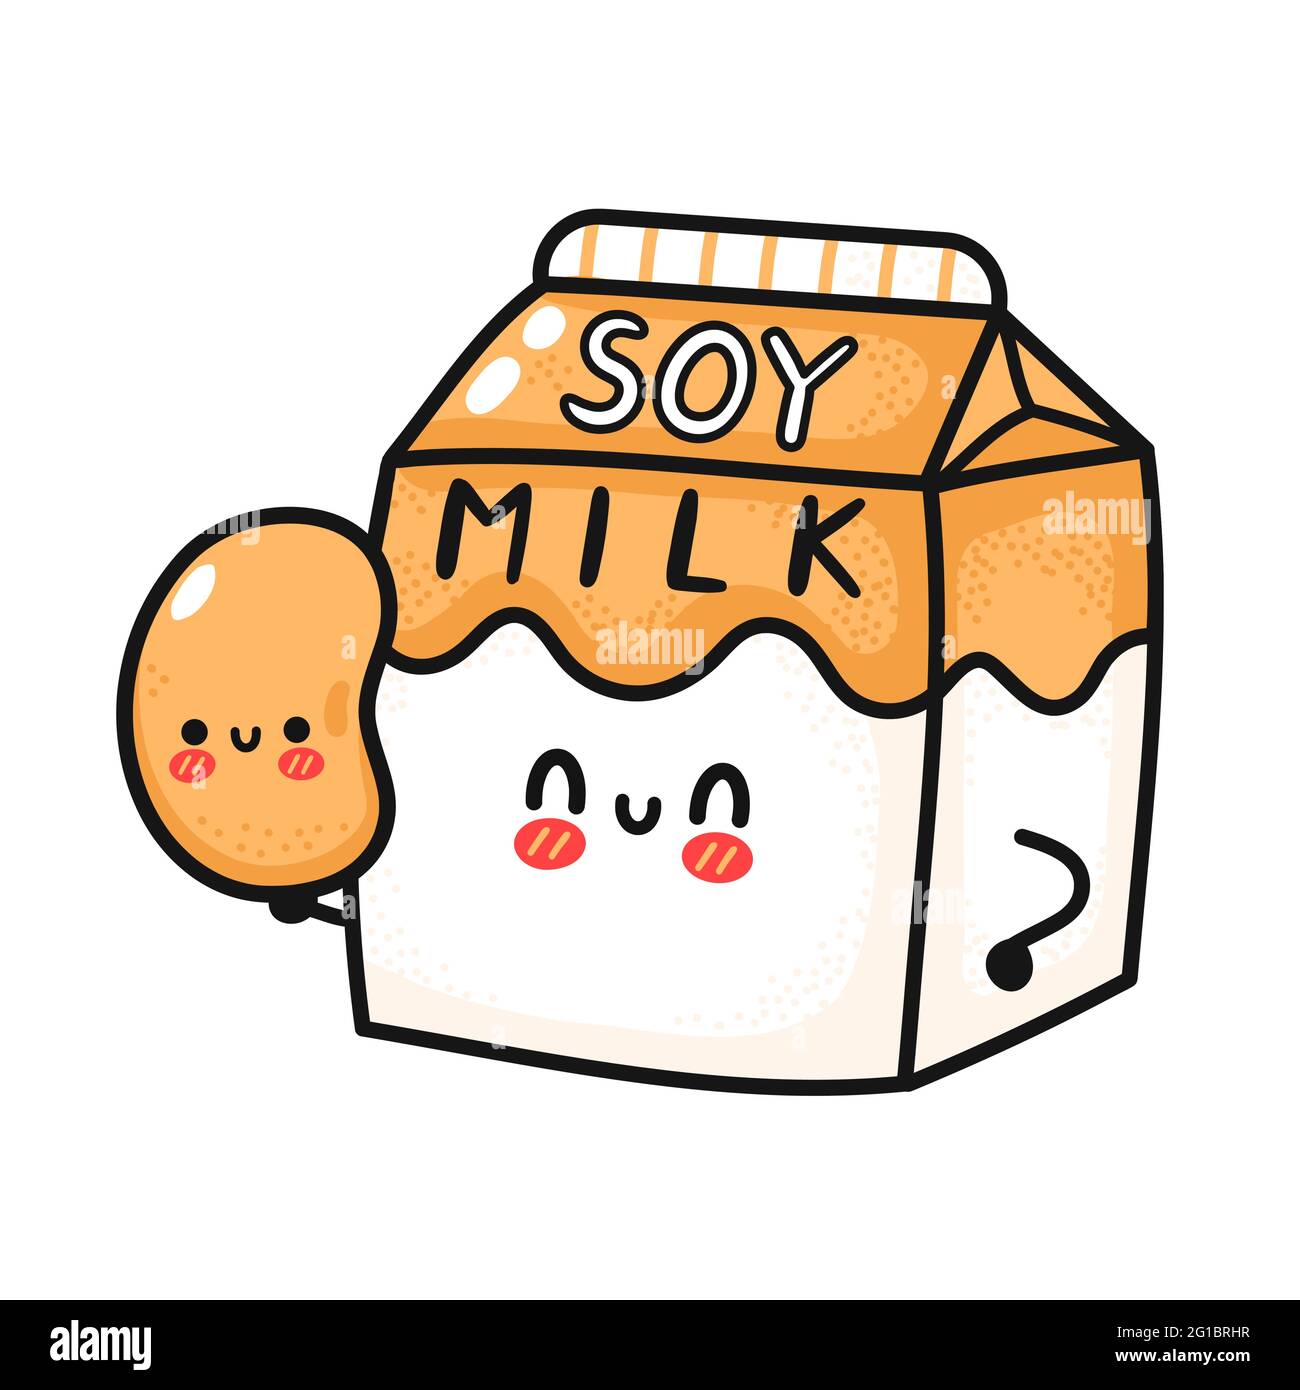 https://c8.alamy.com/comp/2G1BRHR/cute-funny-soy-milk-box-hold-bean-vector-hand-drawn-cartoon-kawaii-character-illustration-icon-isolated-on-white-background-soy-milk-paper-box-mascot-character-concept-2G1BRHR.jpg